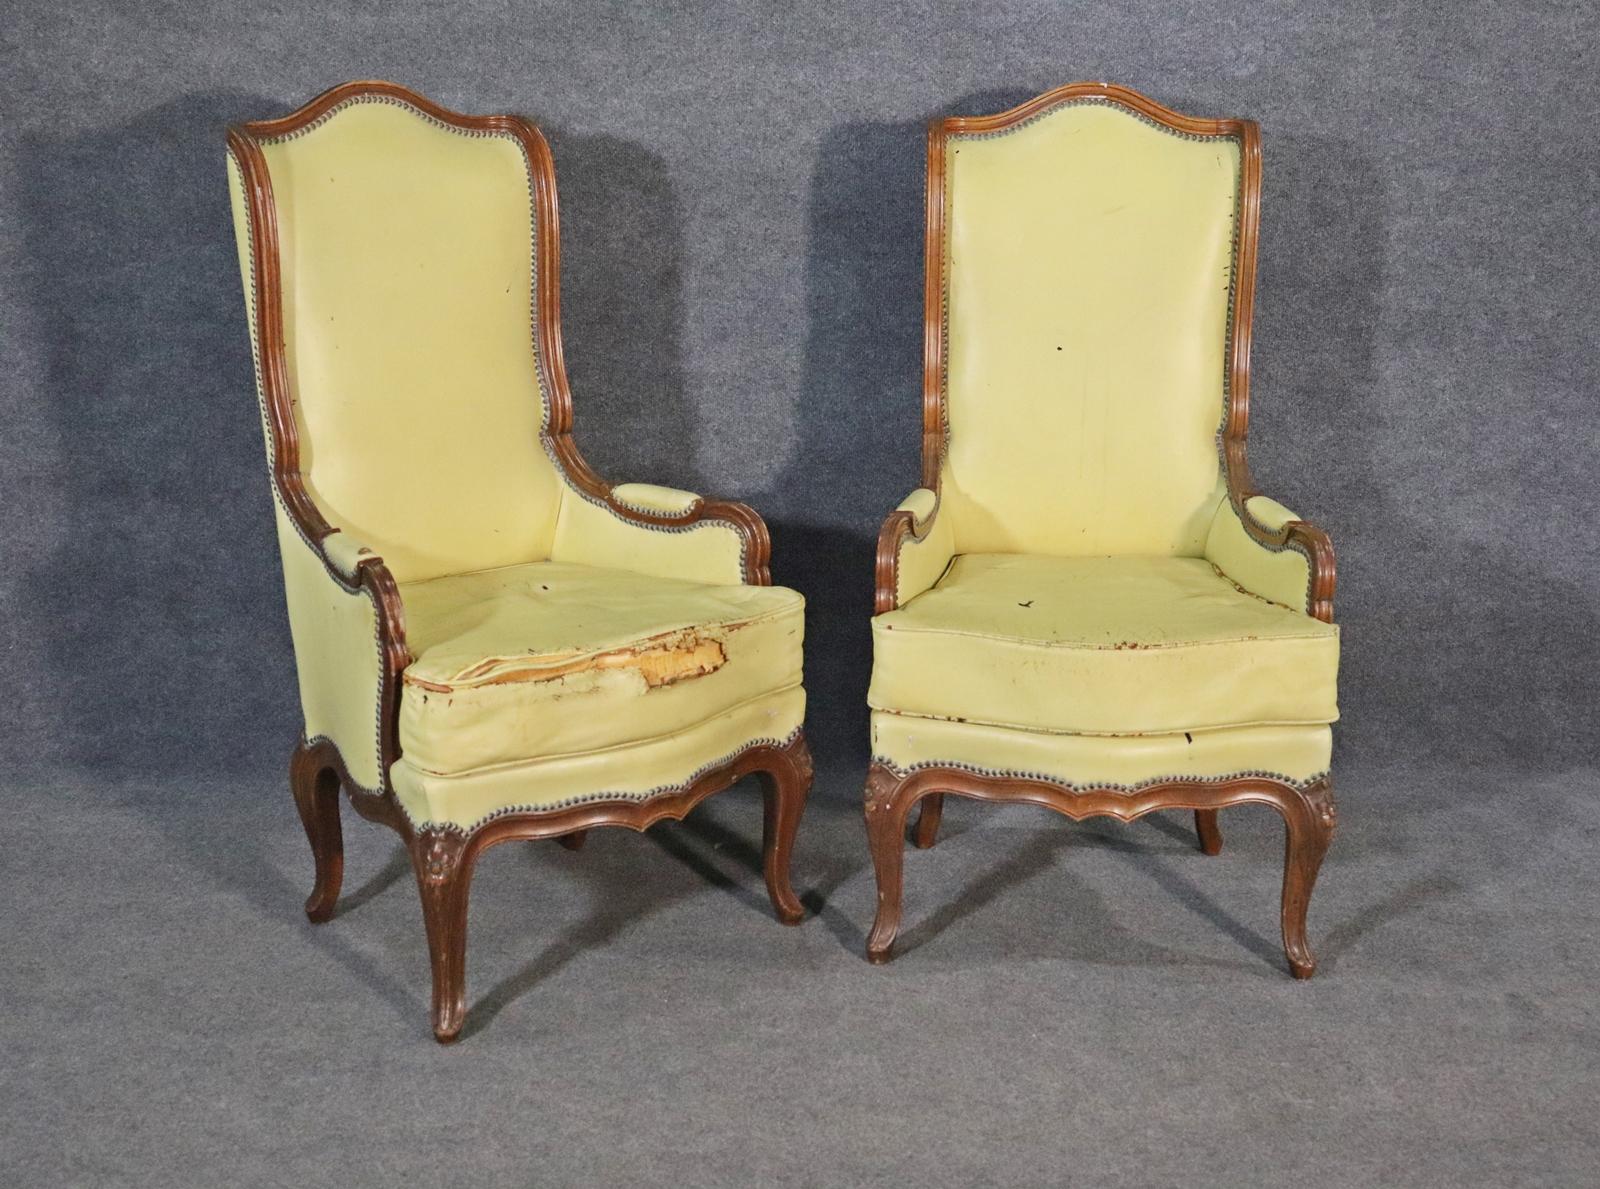 Carved wood frames. Leather upholstery. Nail head trim. Measures: 45 7/8